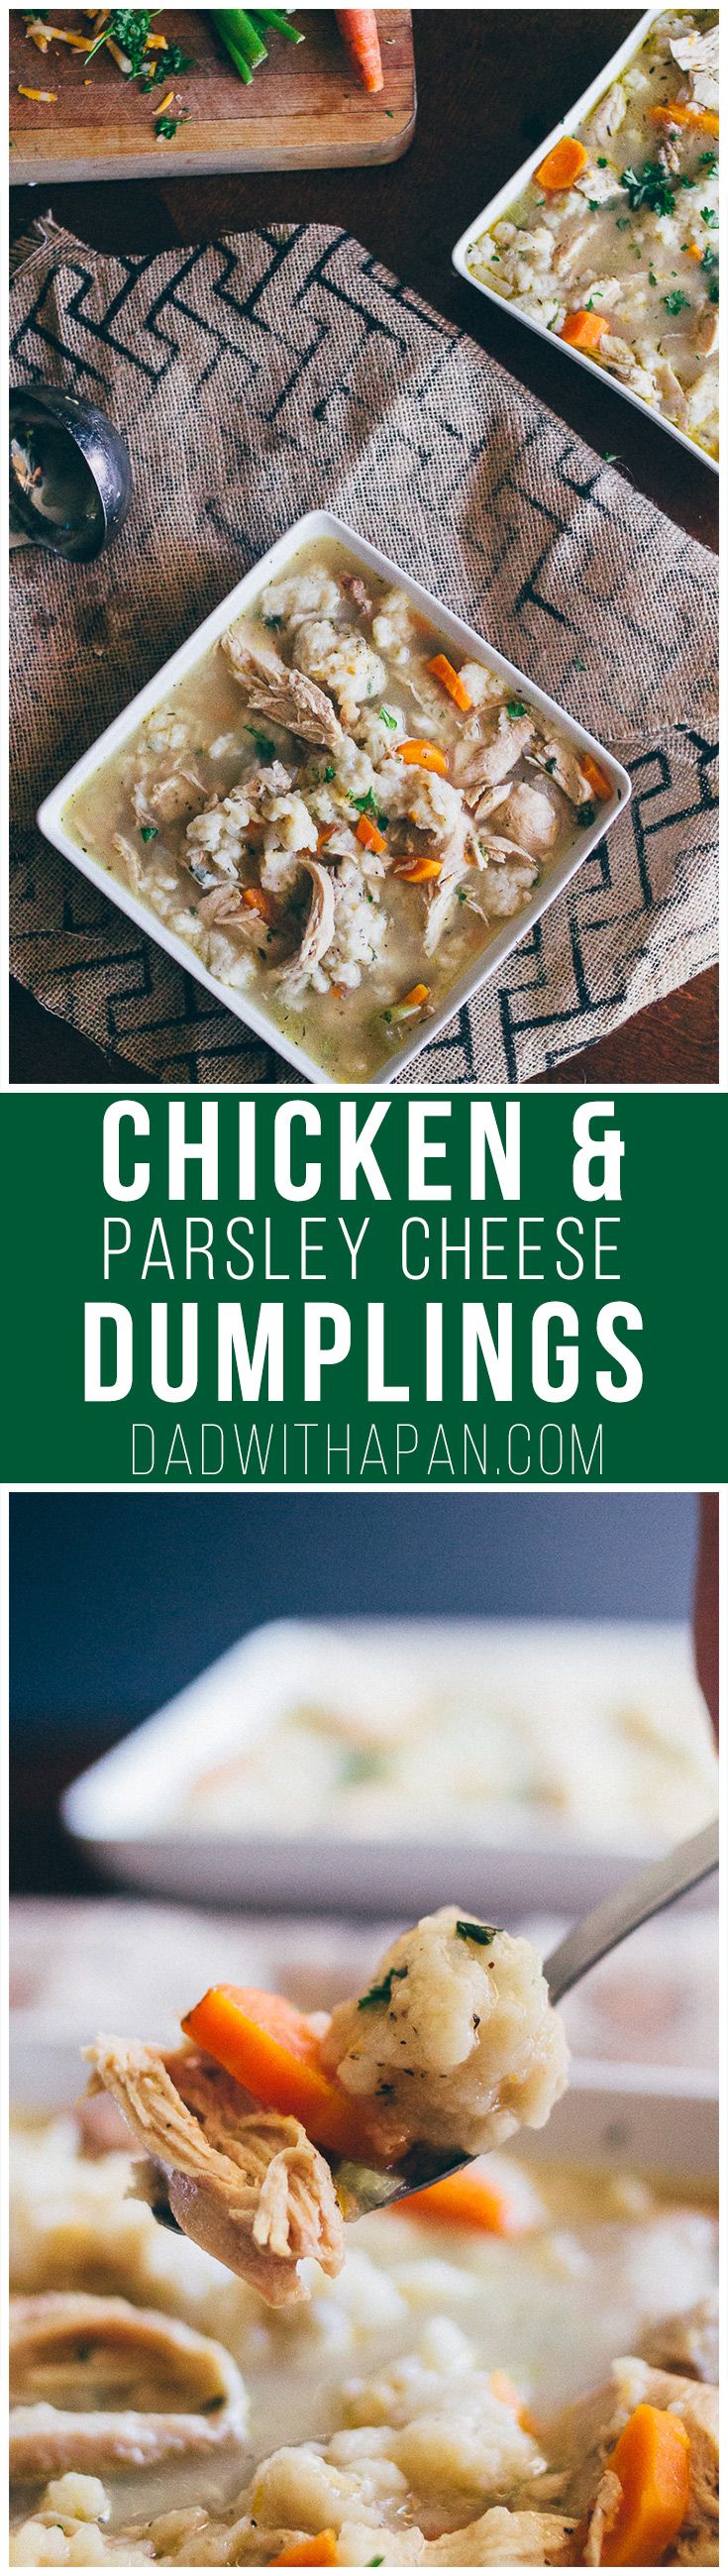 Chicken And Parsley Cheese Dumplings